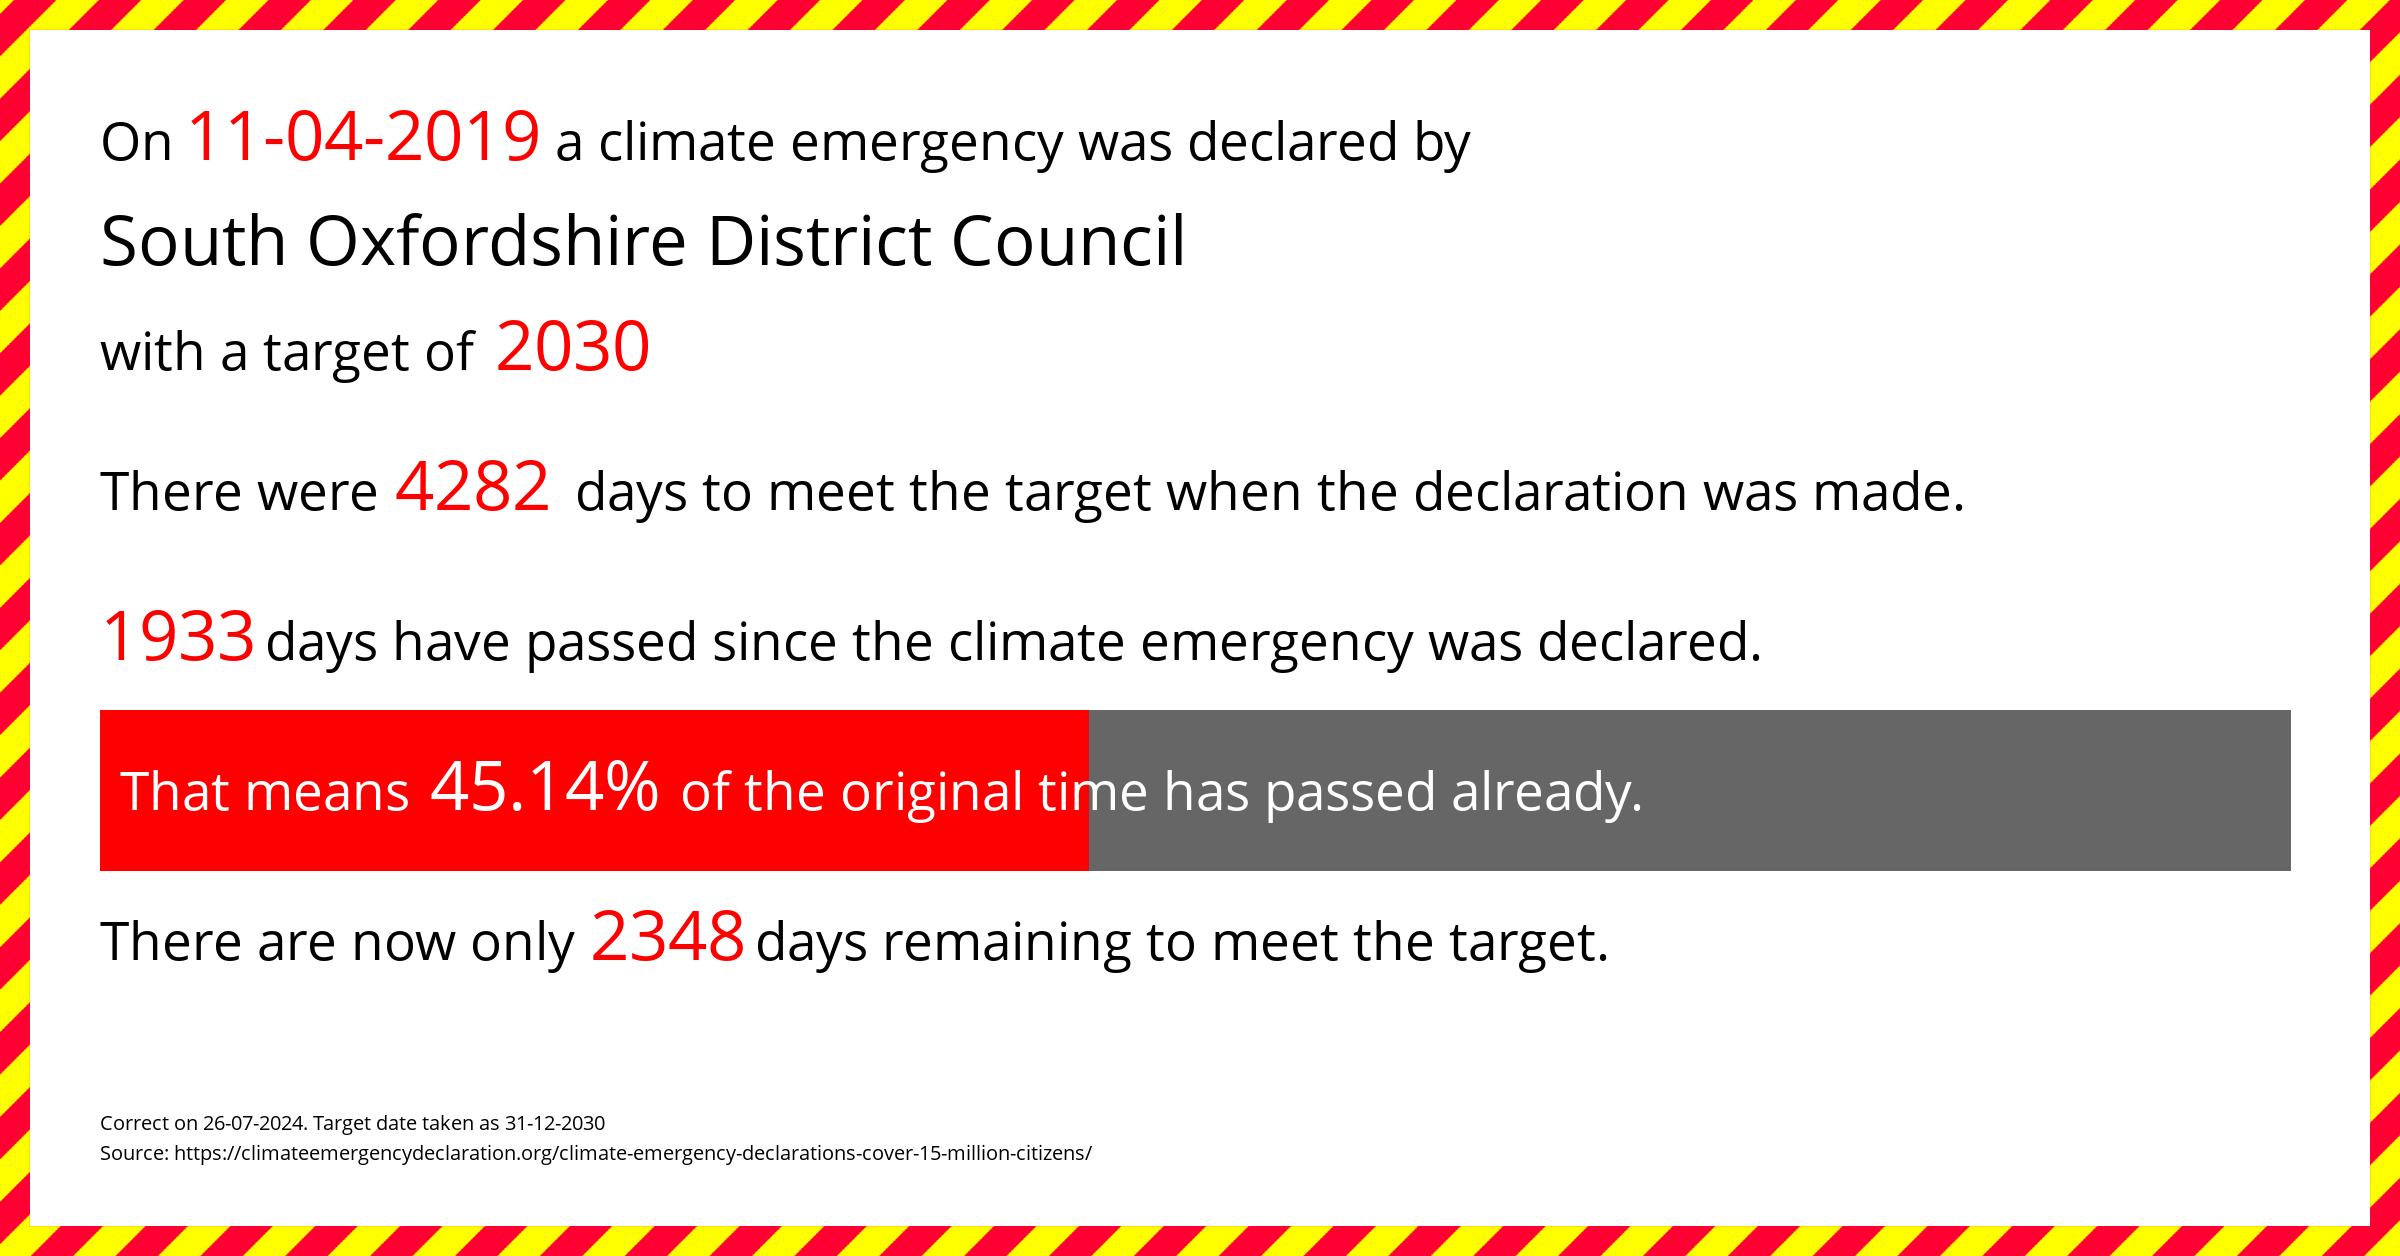 South Oxfordshire District Council declared a Climate emergency on Thursday 11th April 2019, with a target of 2030.